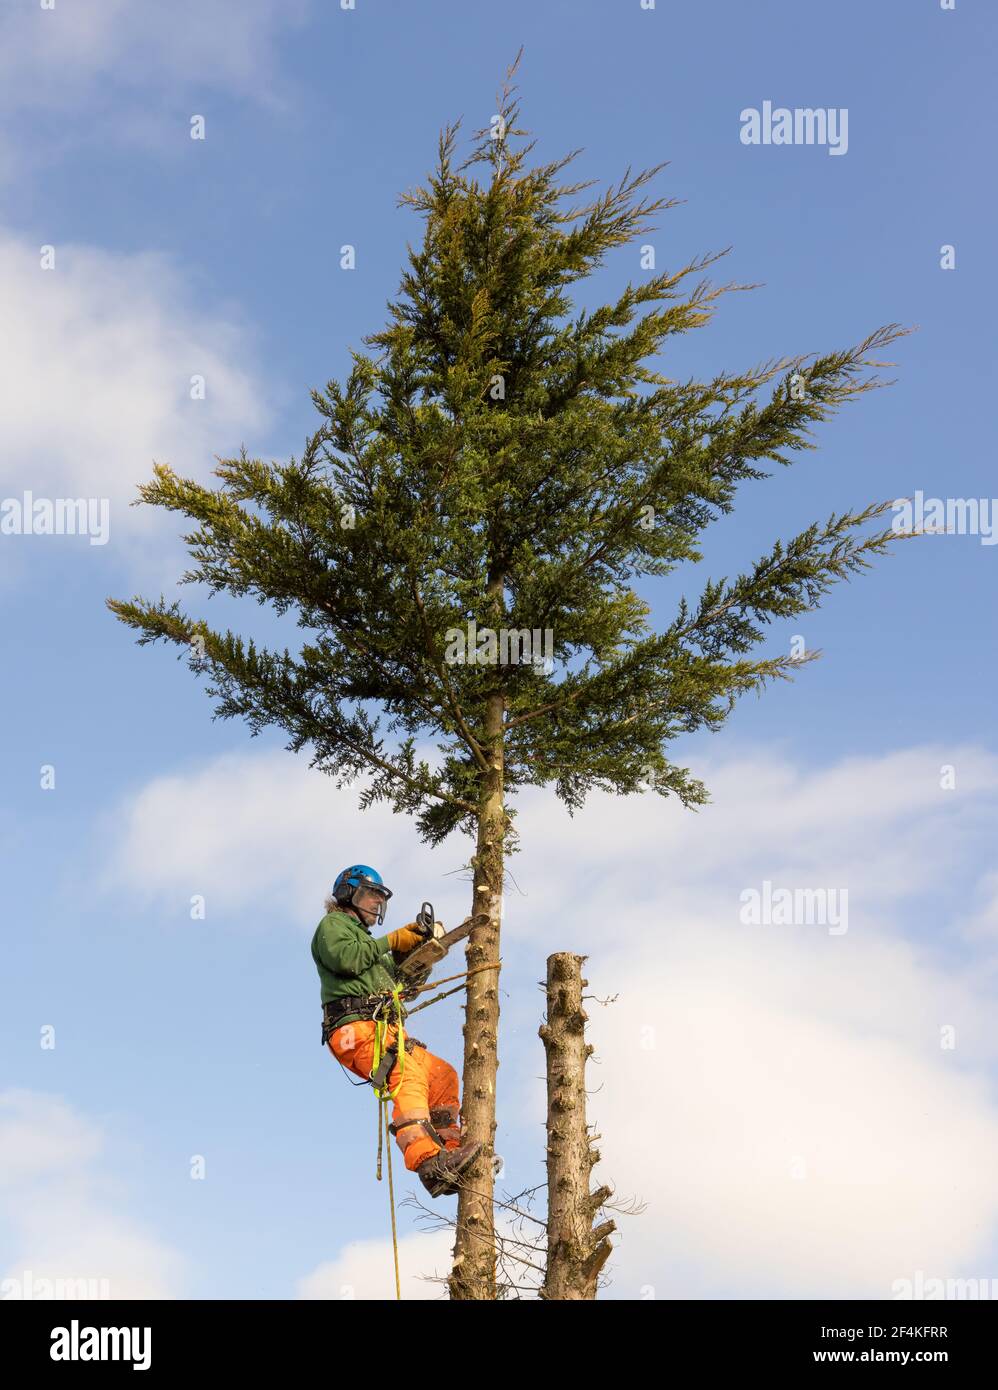 Tree Surgeon Arborist in a harness cutting down an overgrown Conifer tree against a blue sky. Much Hadham, Hertfordshire. UK Stock Photo